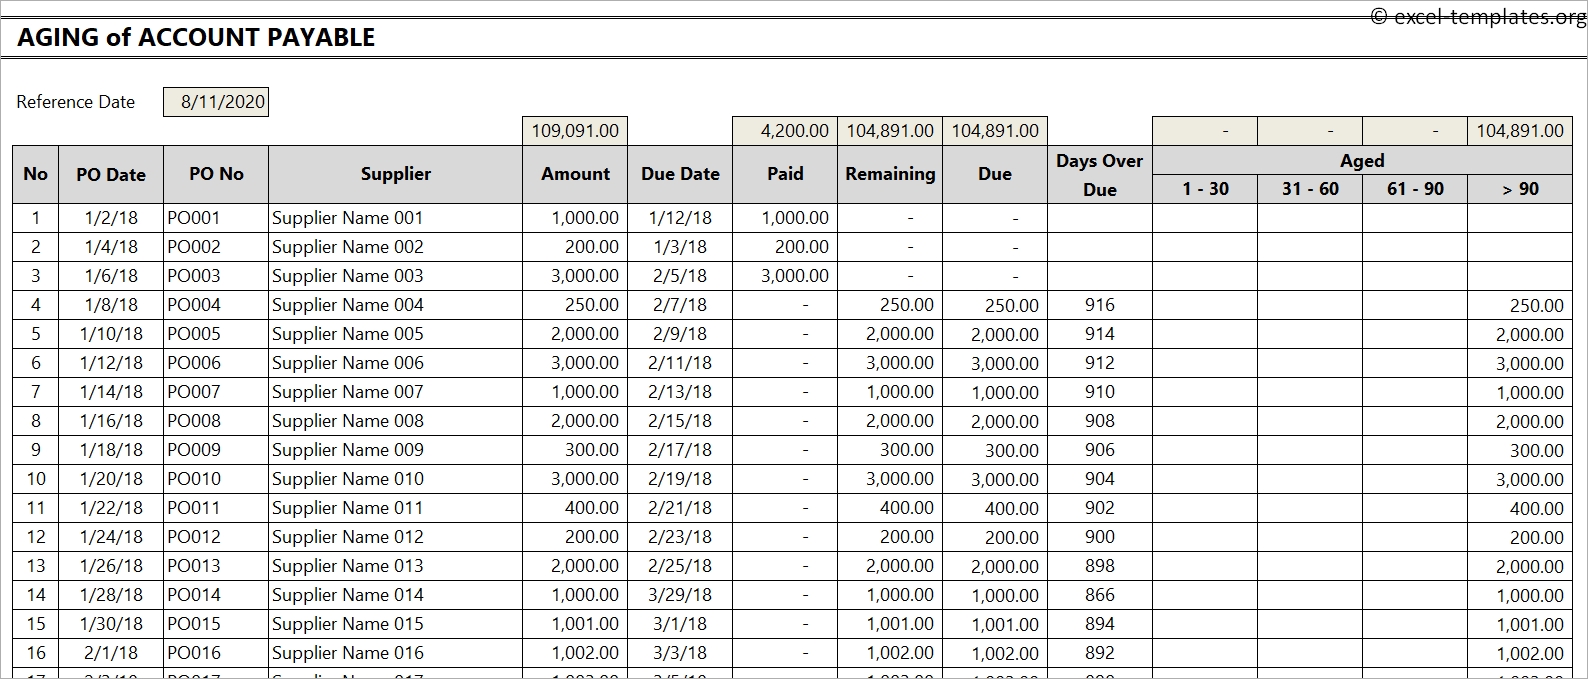 Aging of Account Payable Template